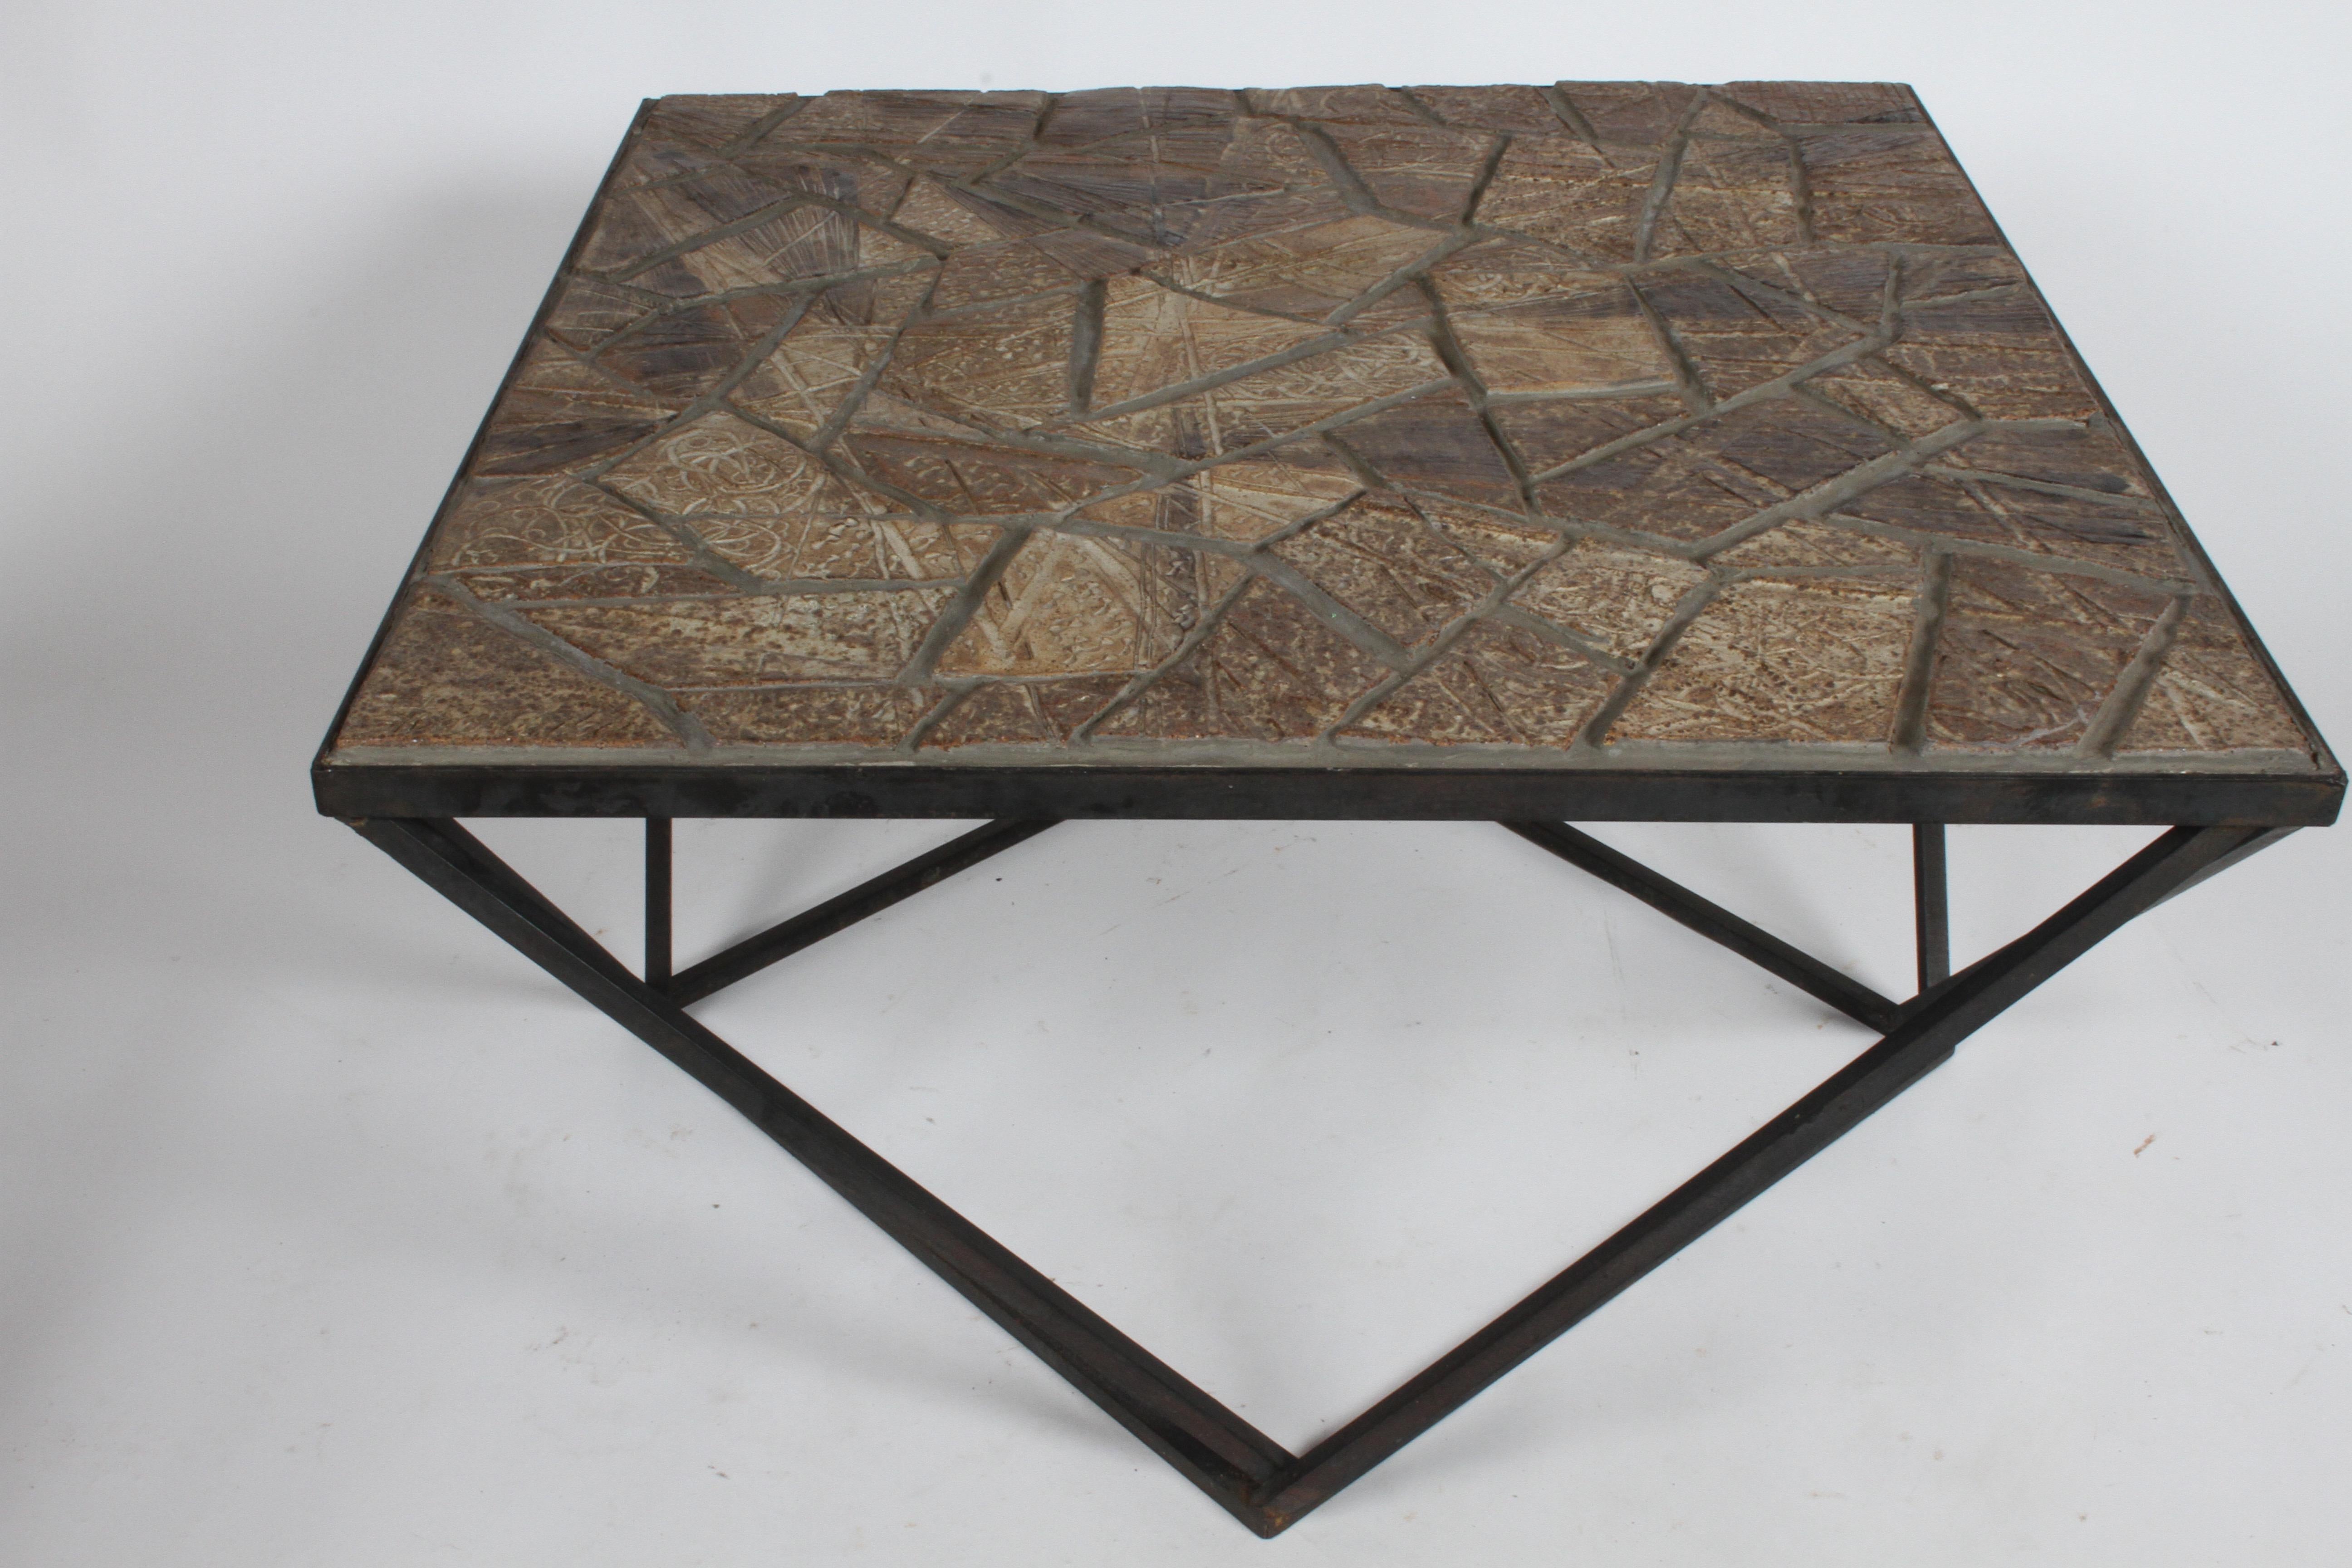 J. Ormond Sanderson Straw Valley Pottery Mid-Century Modern Cubist Coffee Table  For Sale 1